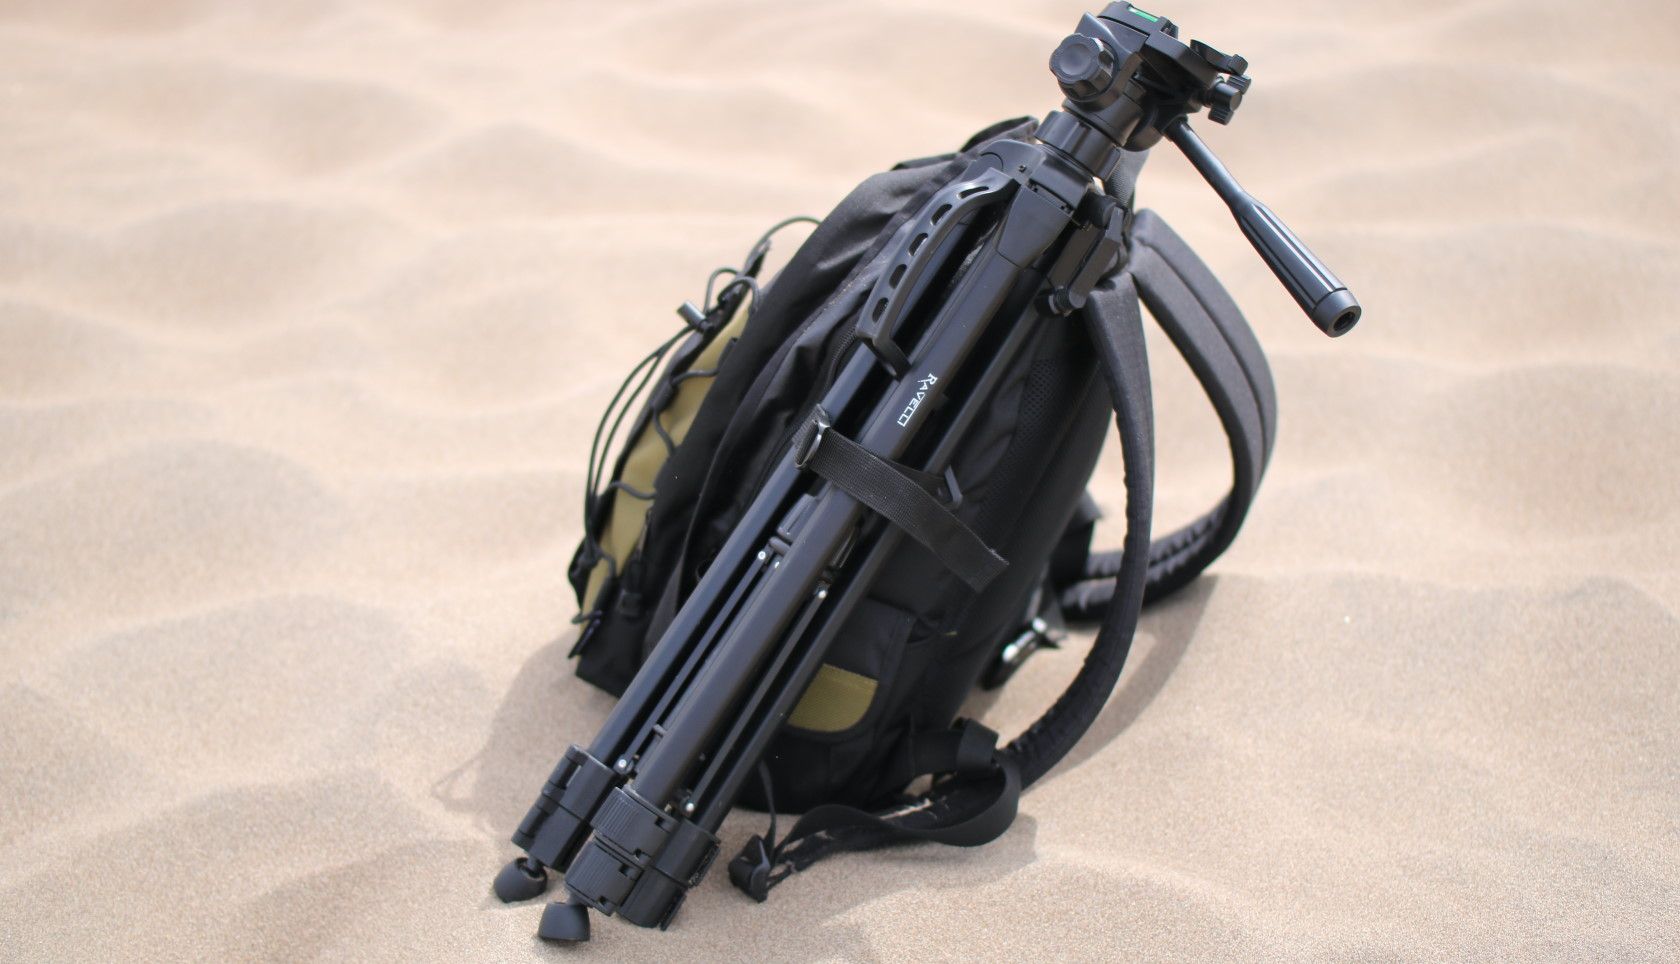 Camera bag on desert sand attached to camera tripod